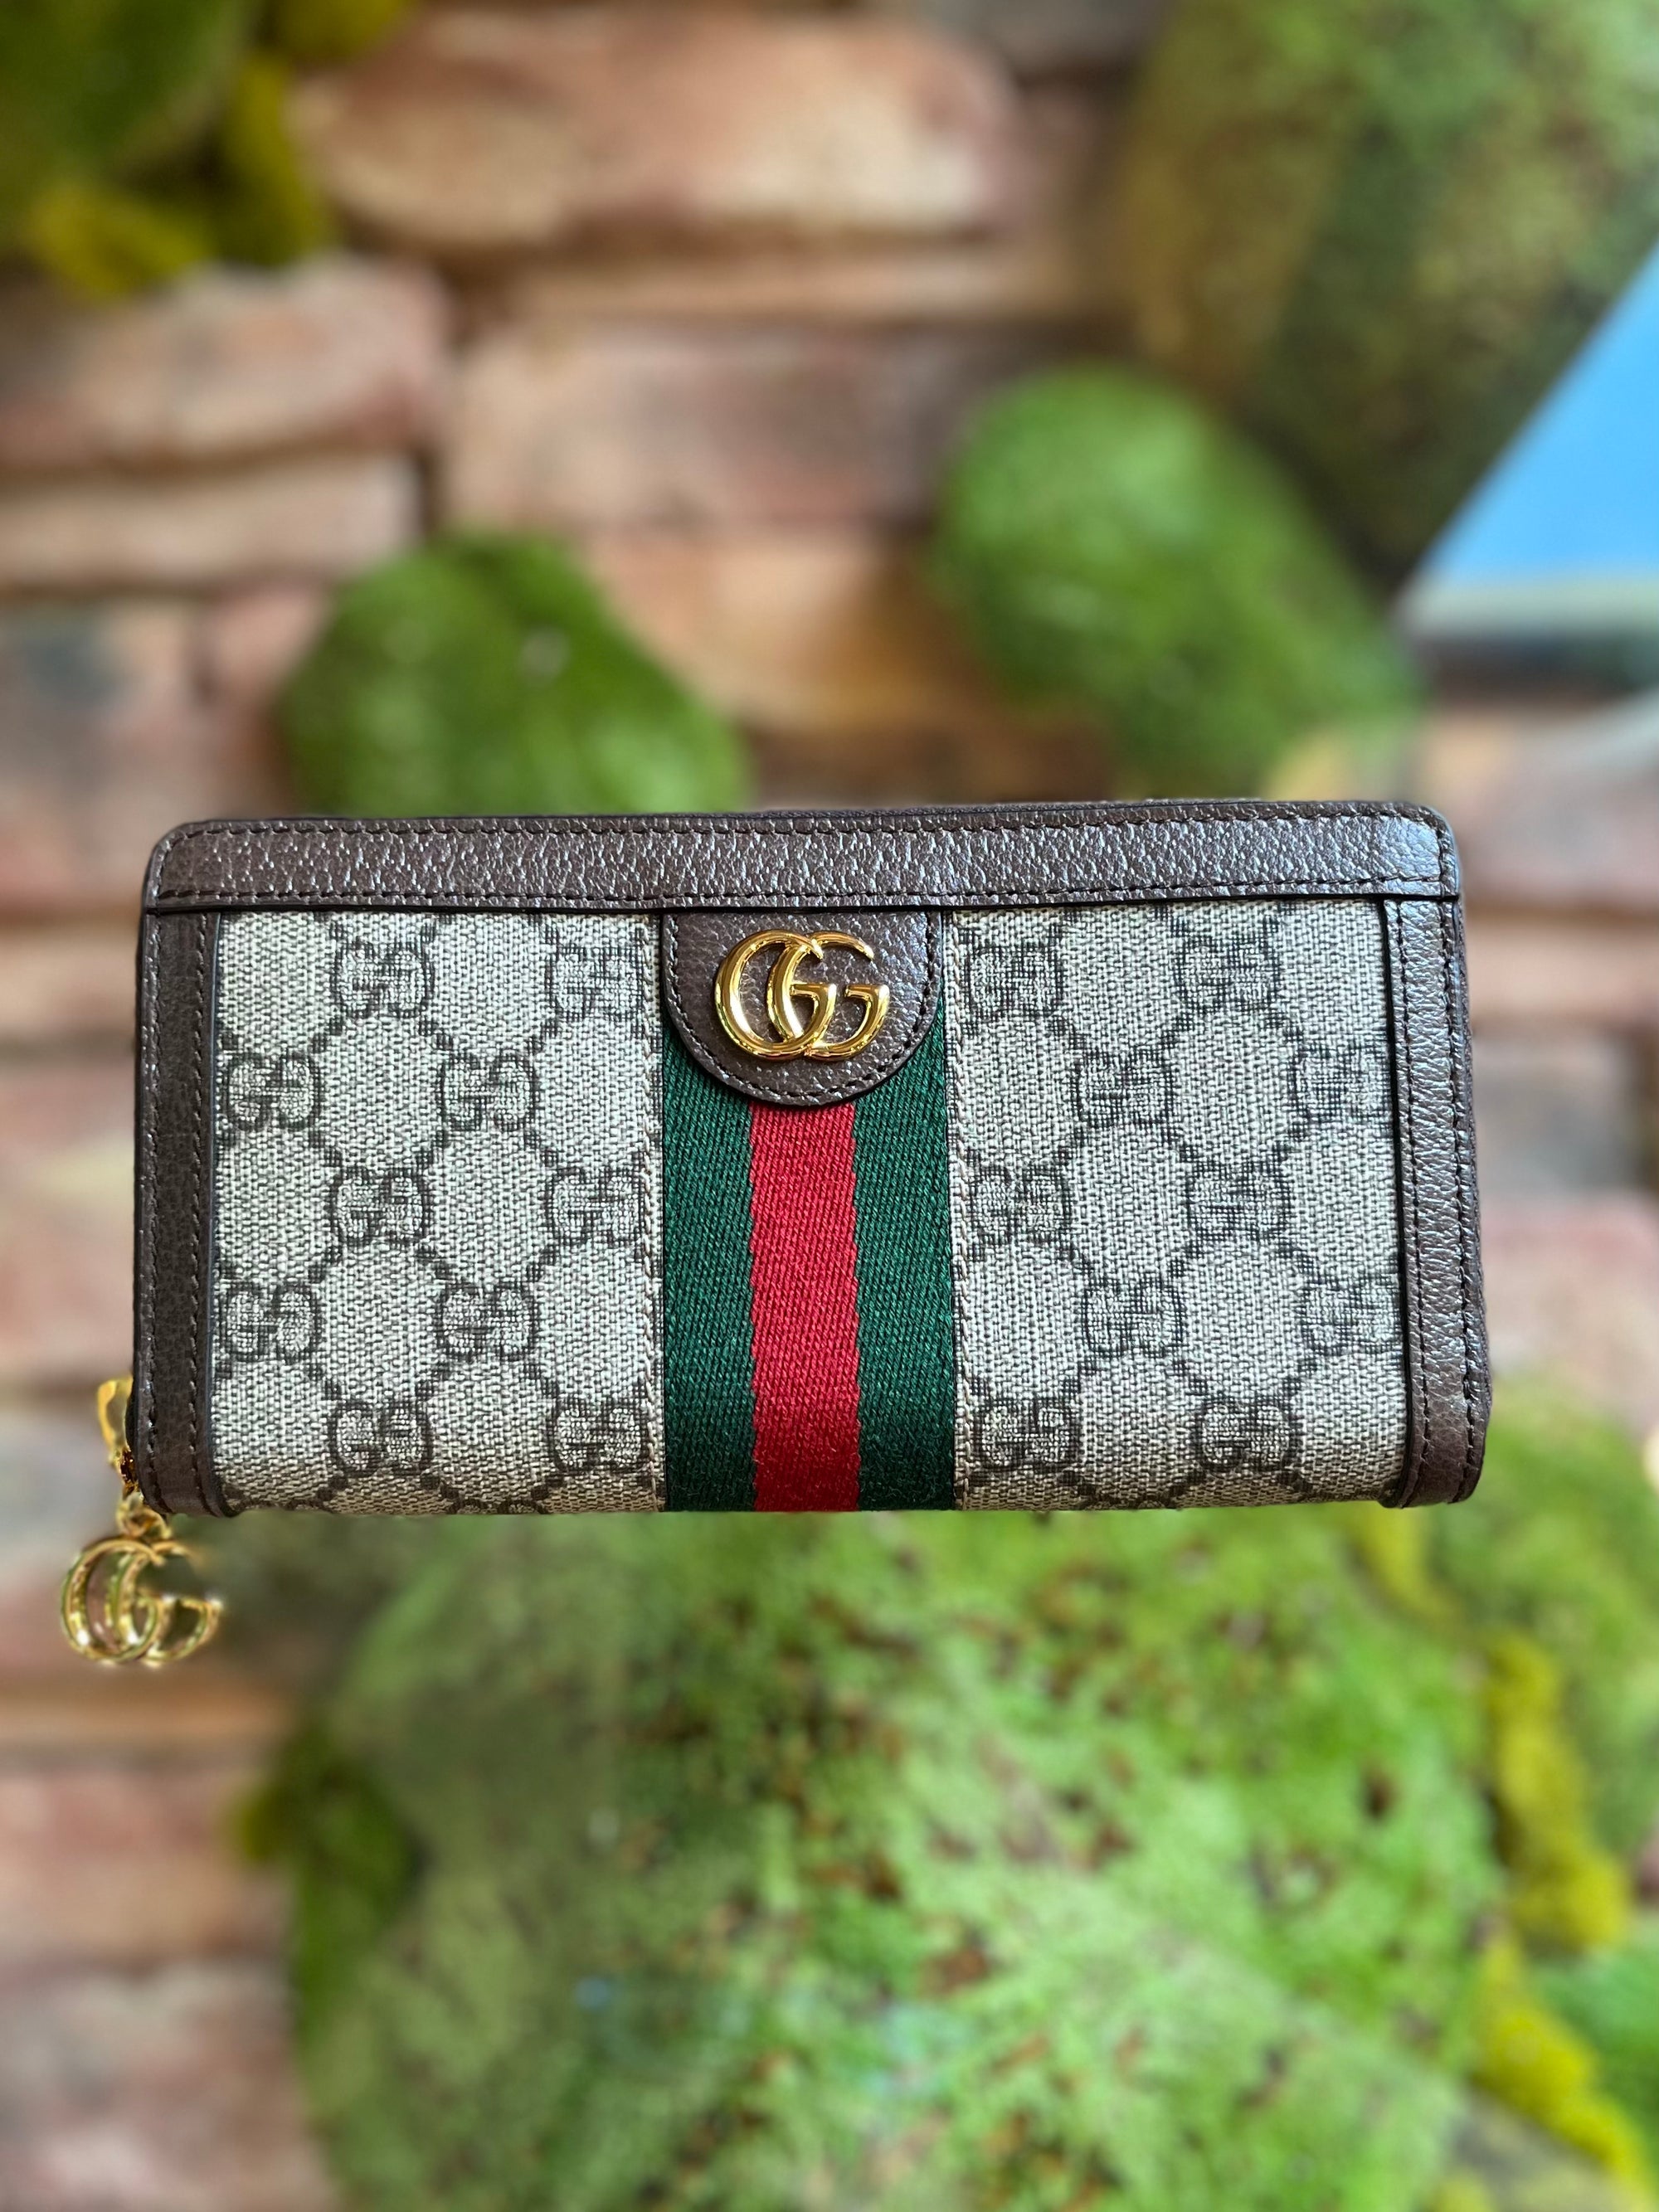 authentic Gucci leather bag - THRIFTWARES